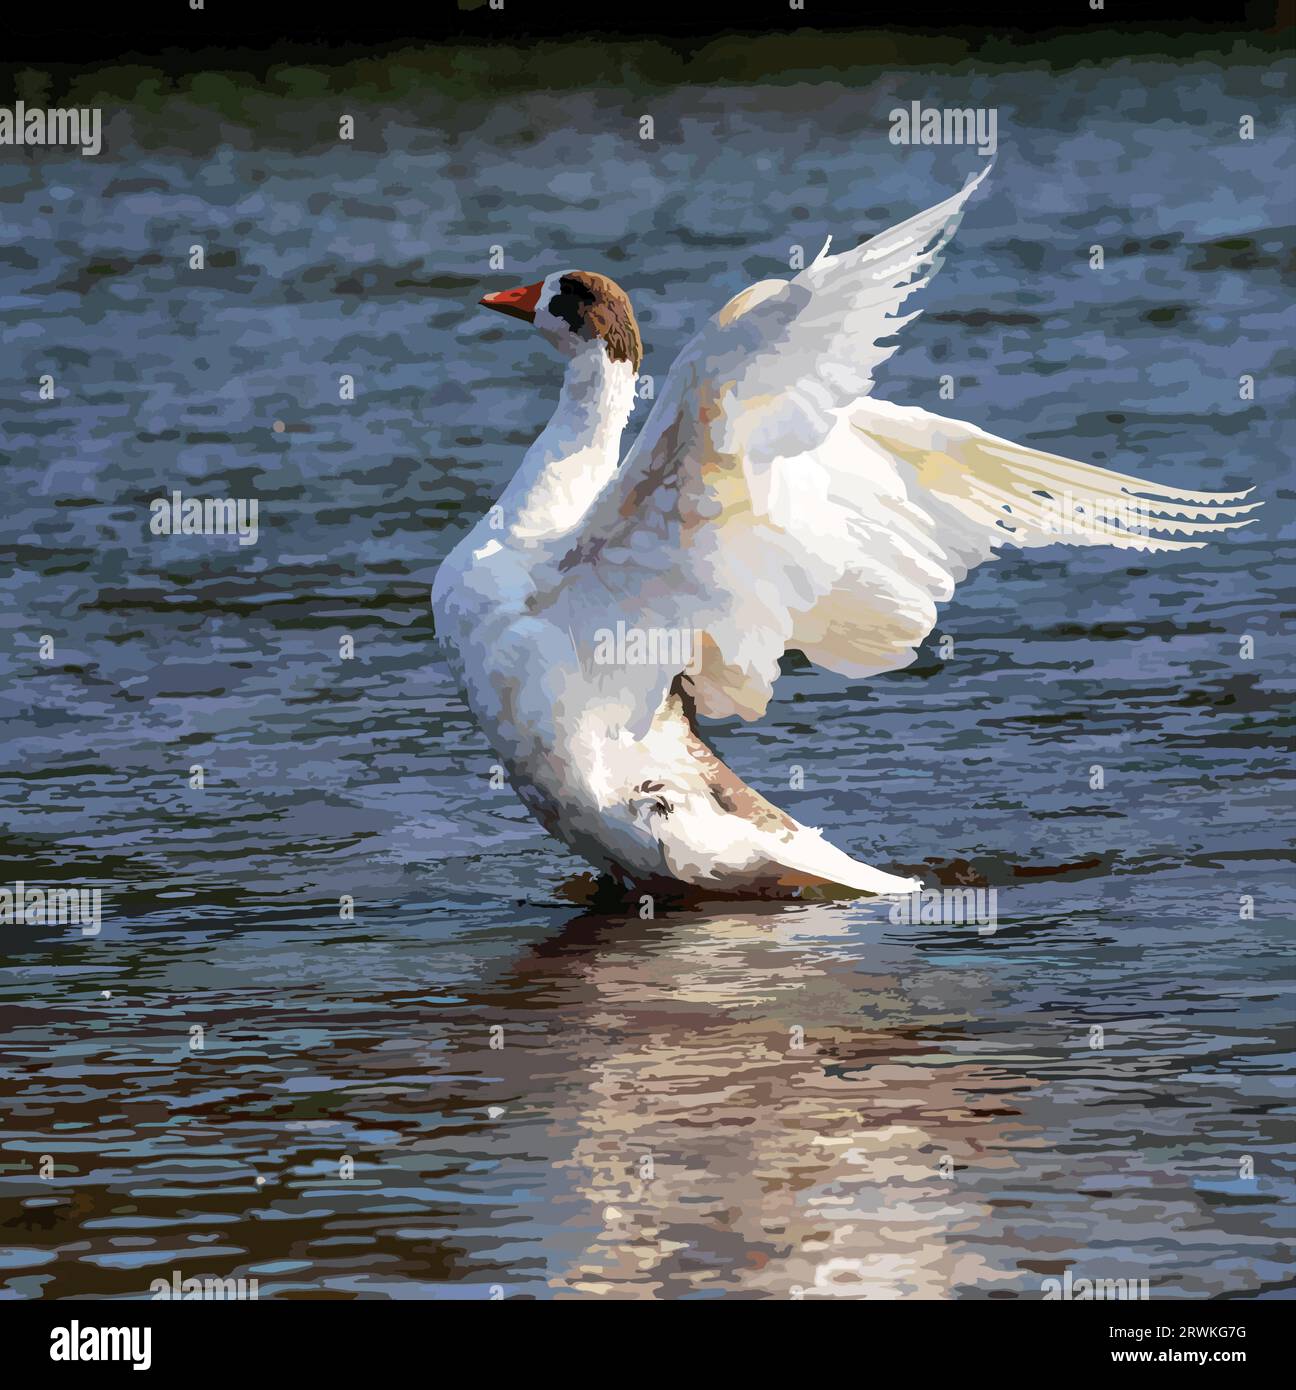 Domestic geese swim in the water. A flock of white beautiful geese in the river. Stock Vector